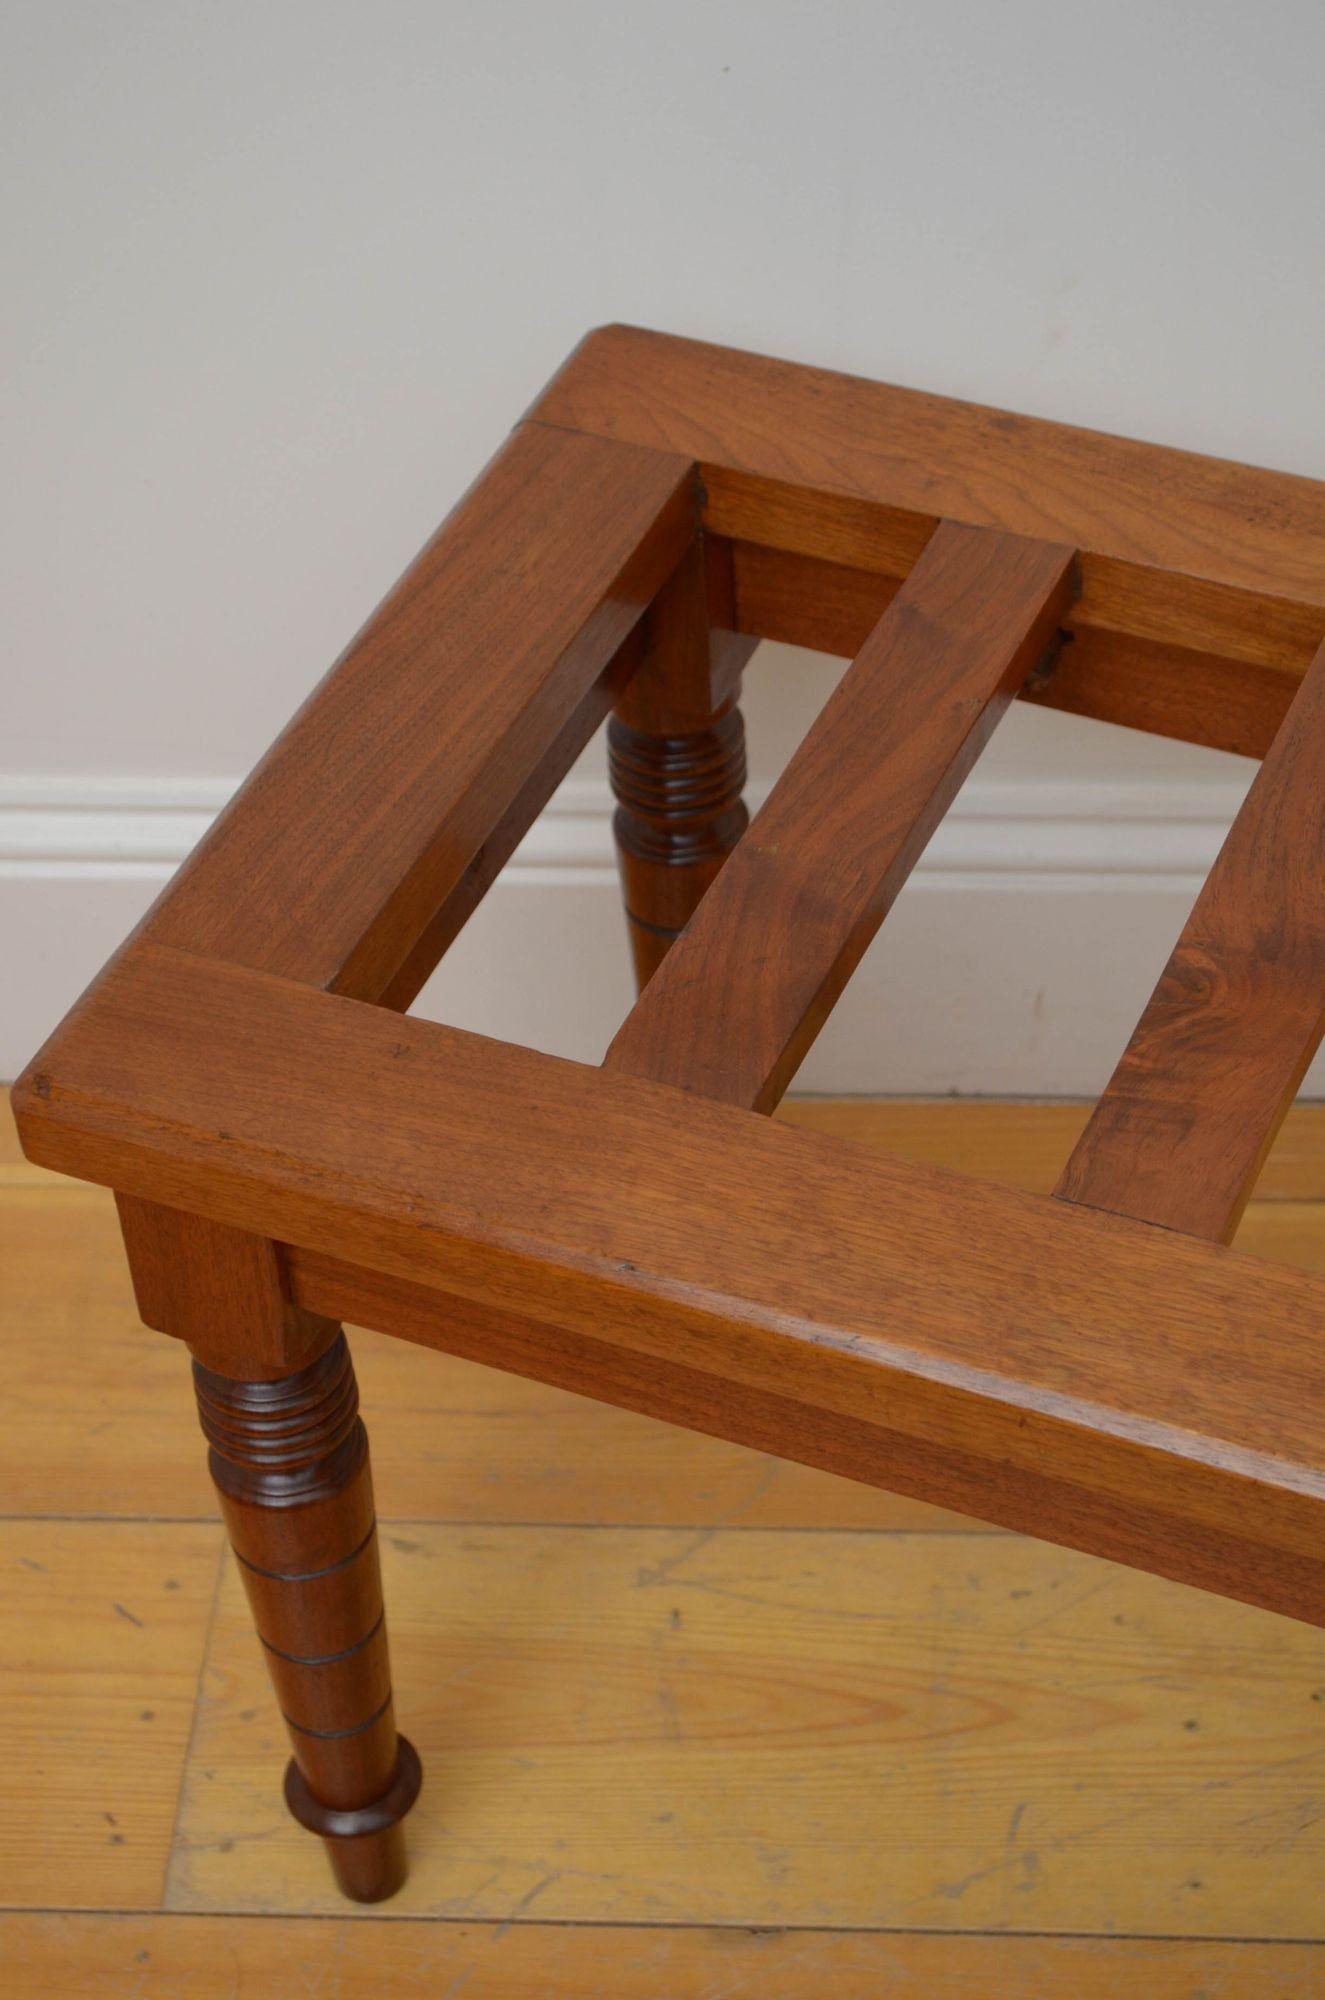 Sn5416 Victorian solid walnut luggage rack with slatted top and turned and ringed tapered legs. This luggage stand would make a good hall bench, all in home ready condition. c1880
H18 1/4